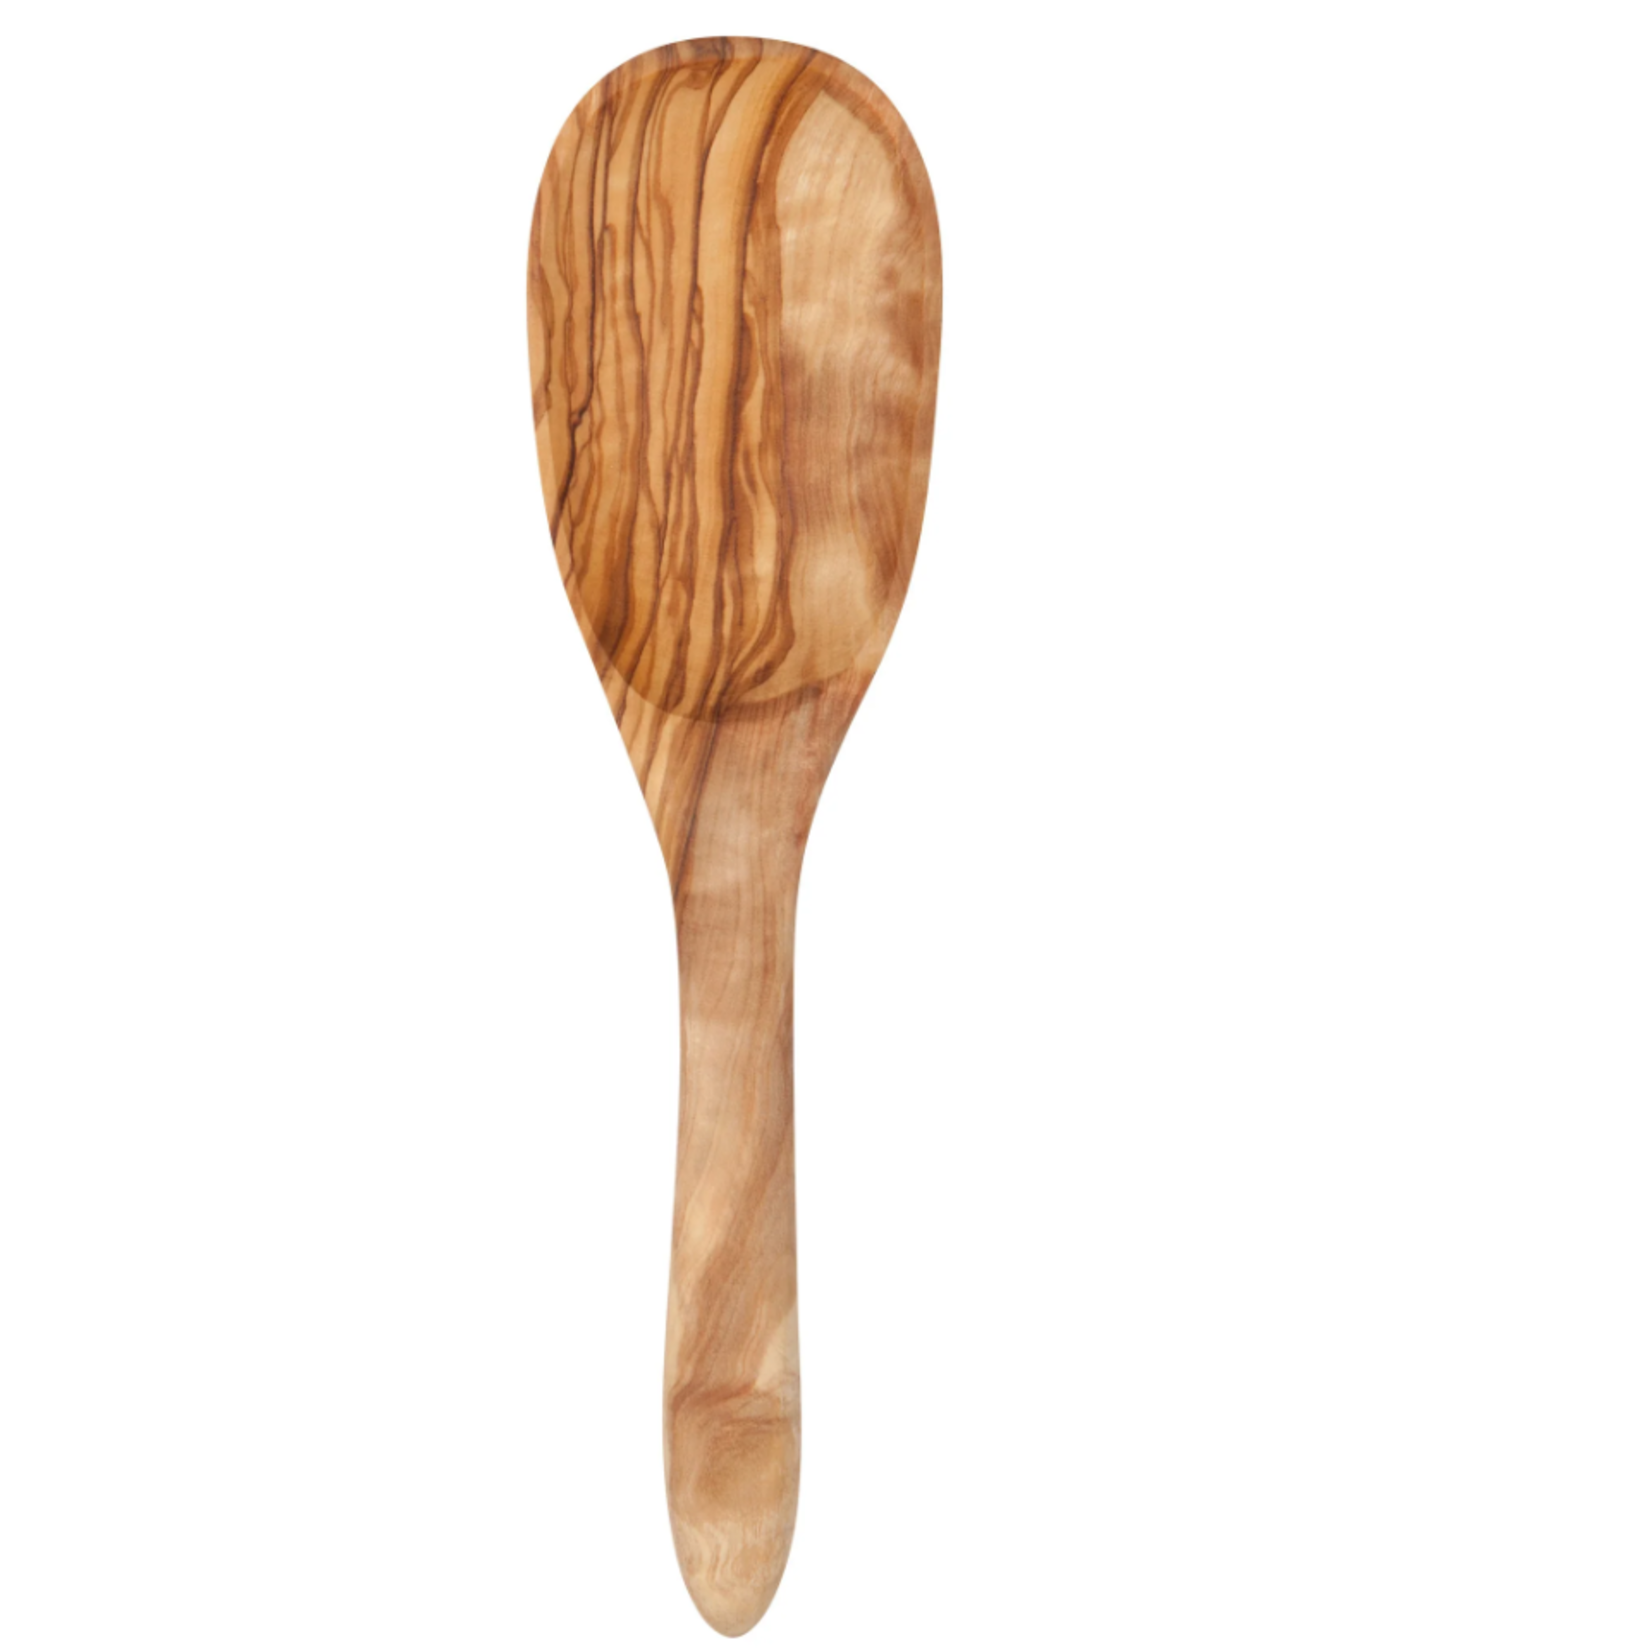 Now Designs Spoon, Rice - Olivewood